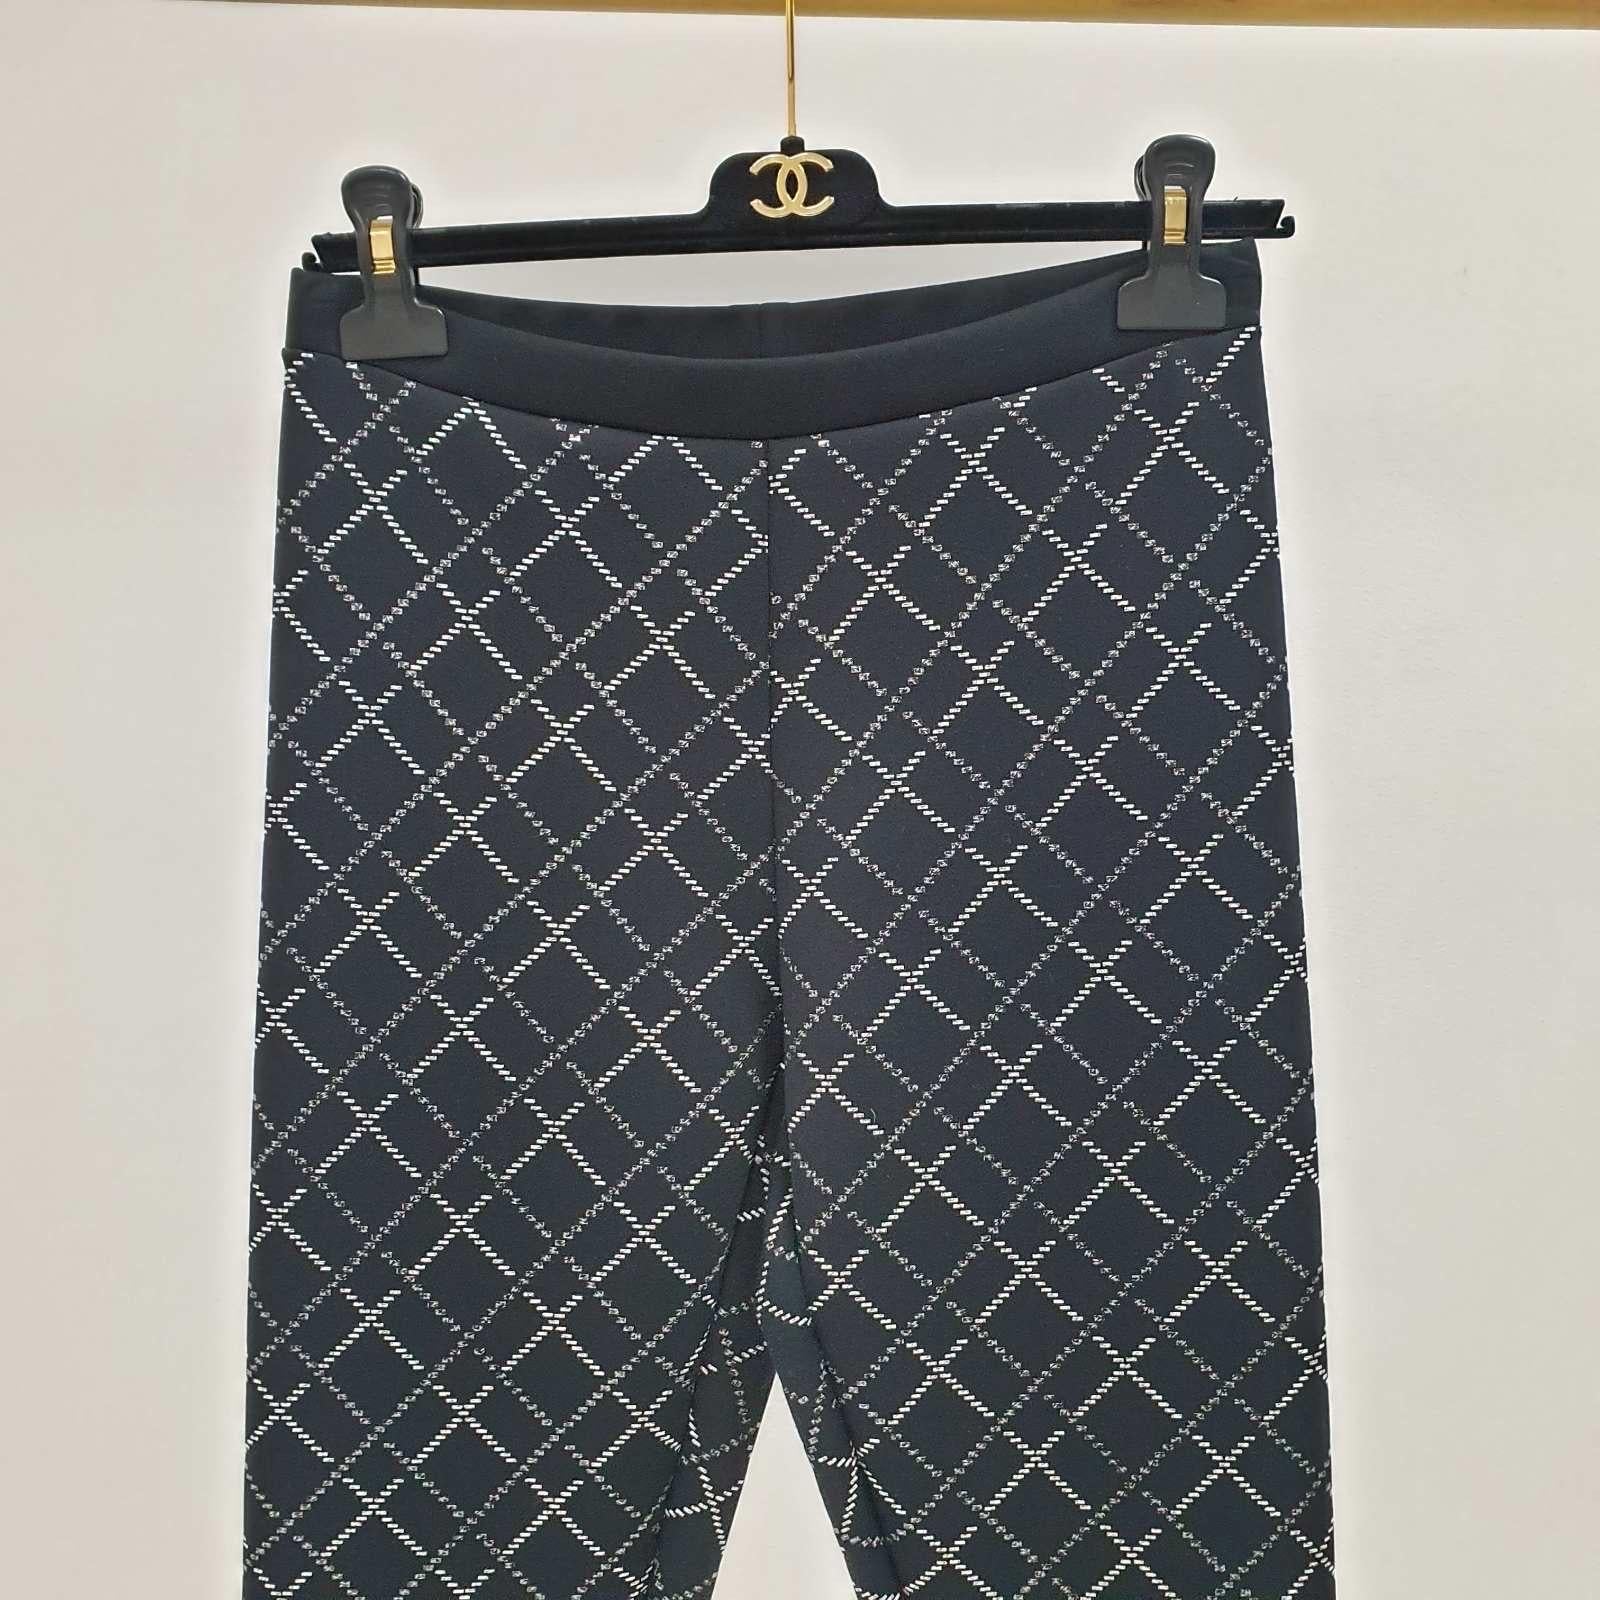 CHANEL 2020 Cruise Runway CC Quilt Pattern Leggings.
Sz.40 
Very good condition. Signs of wear seen on pics